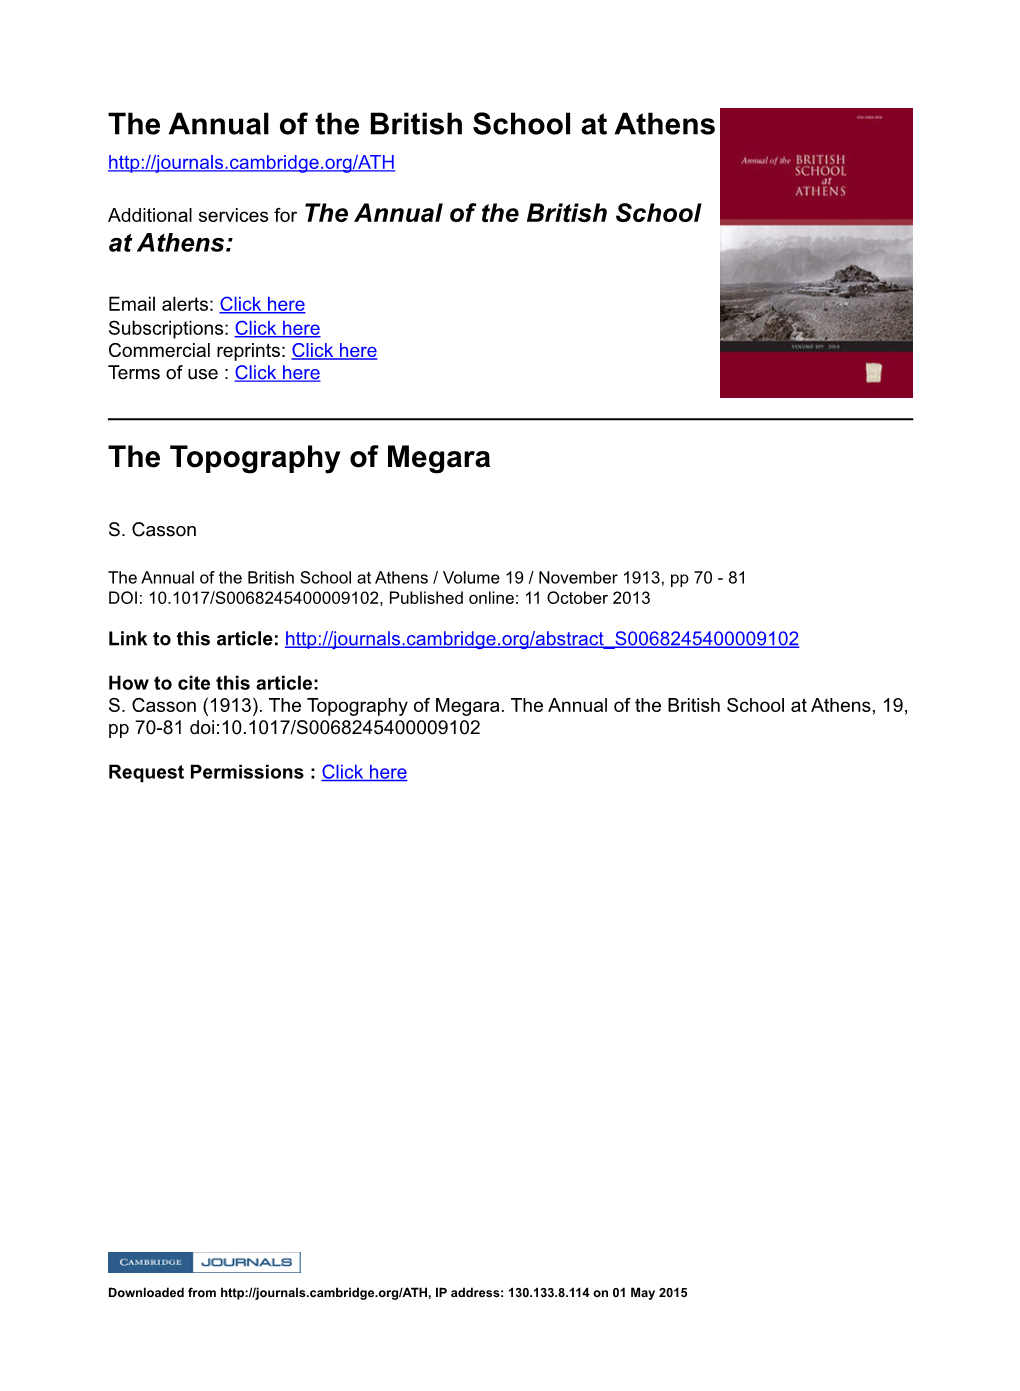 The Annual of the British School at Athens the Topography of Megara